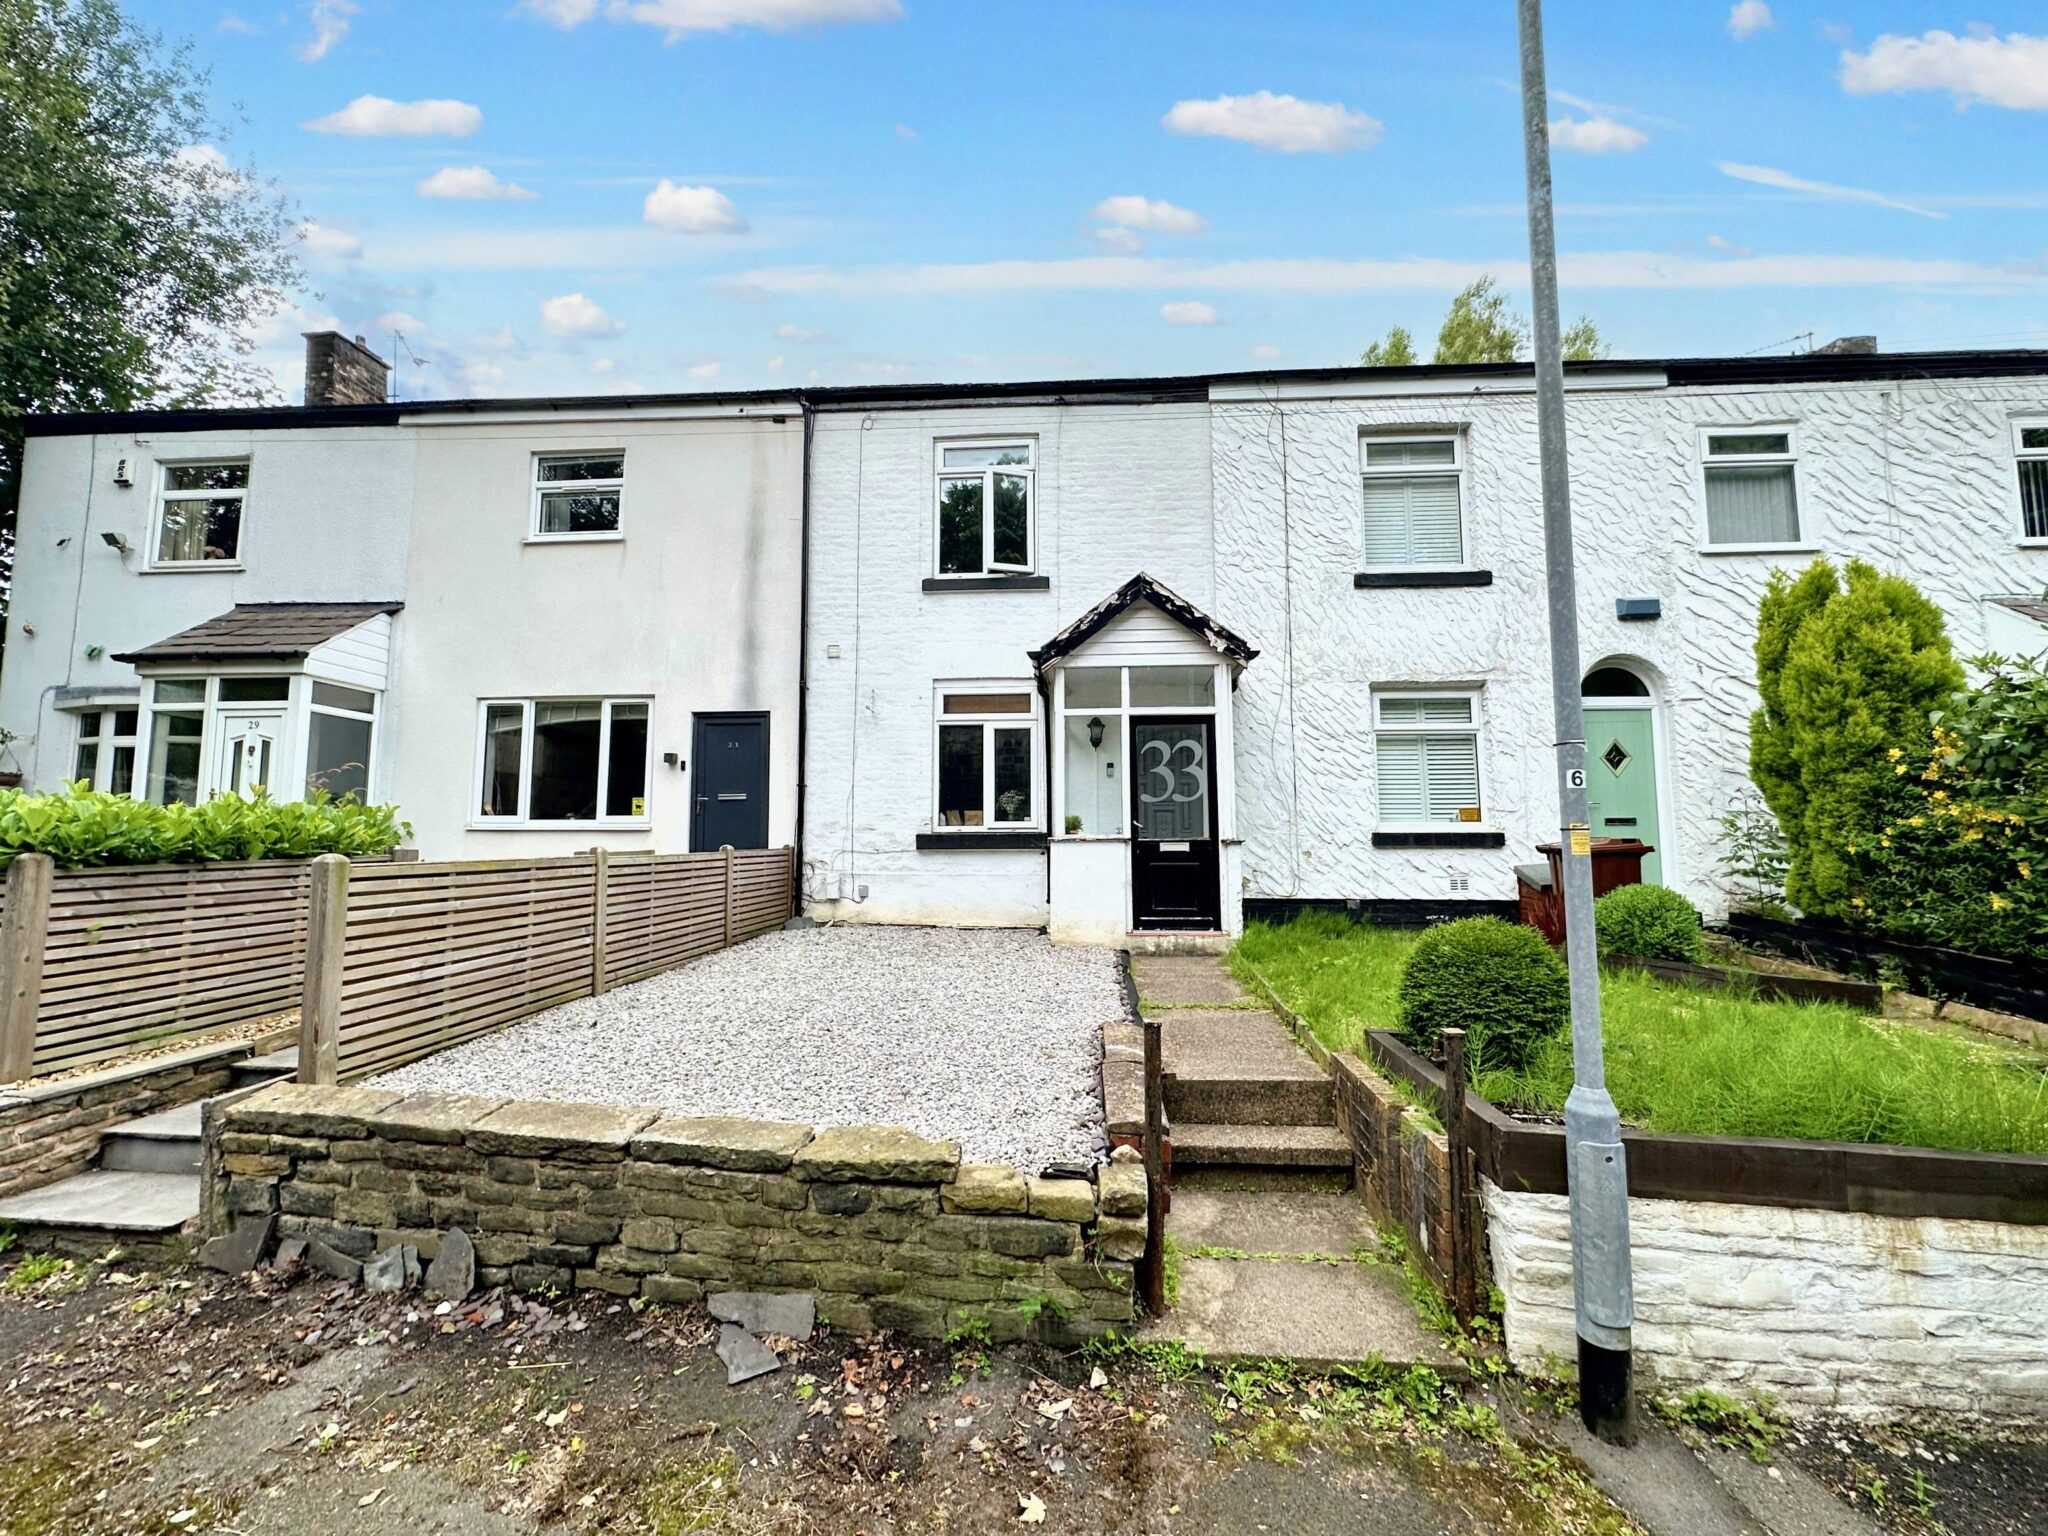 Lower Moss Lane, Whitefield, Manchester, M45 6FA